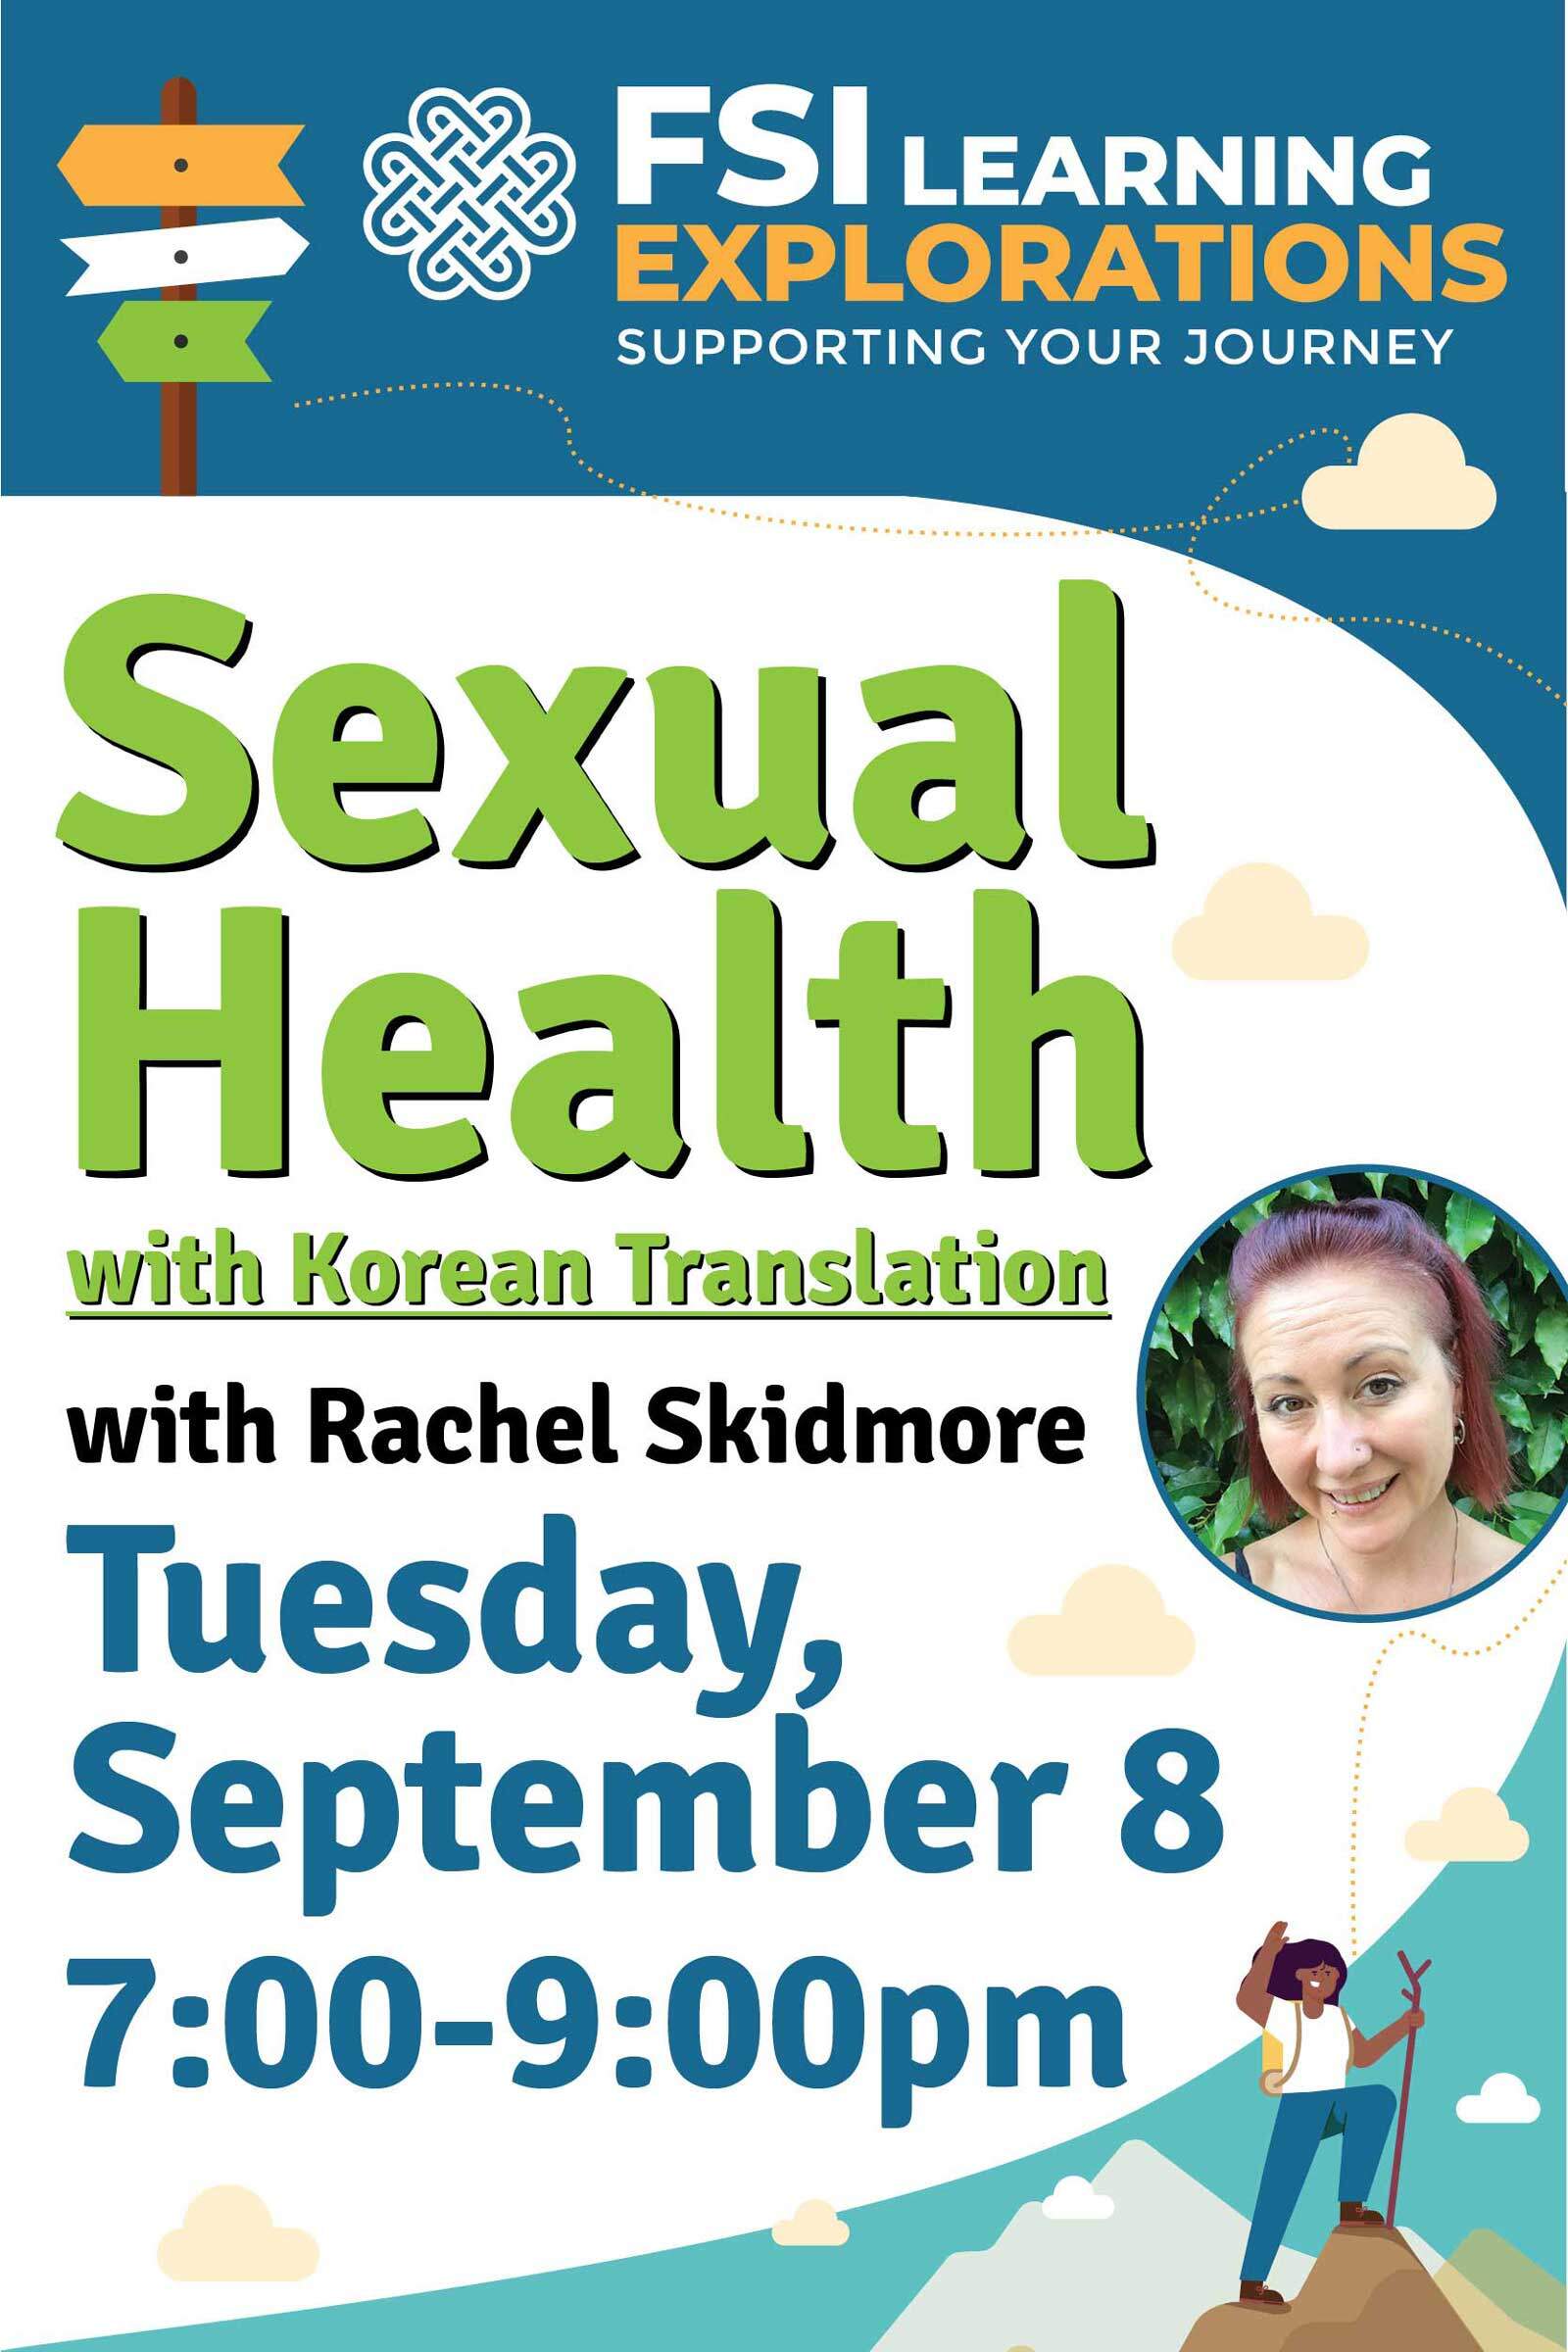 FSI Learning Explorations - Sexual Health with Korean Translation